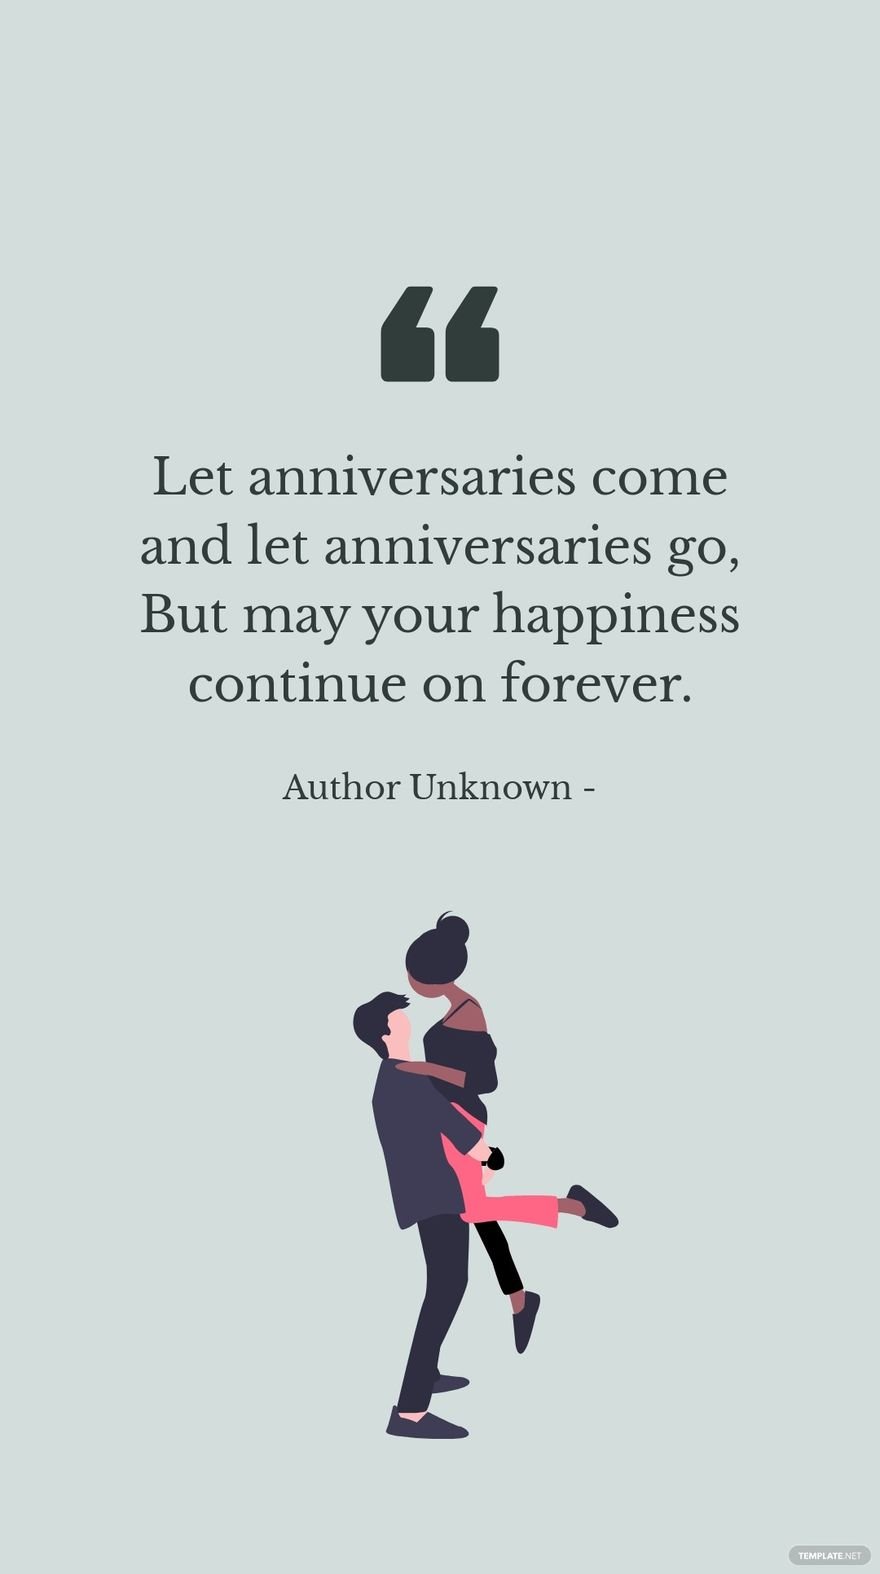 Author Unknown - Let anniversaries come and let anniversaries go, But may your happiness continue on forever.